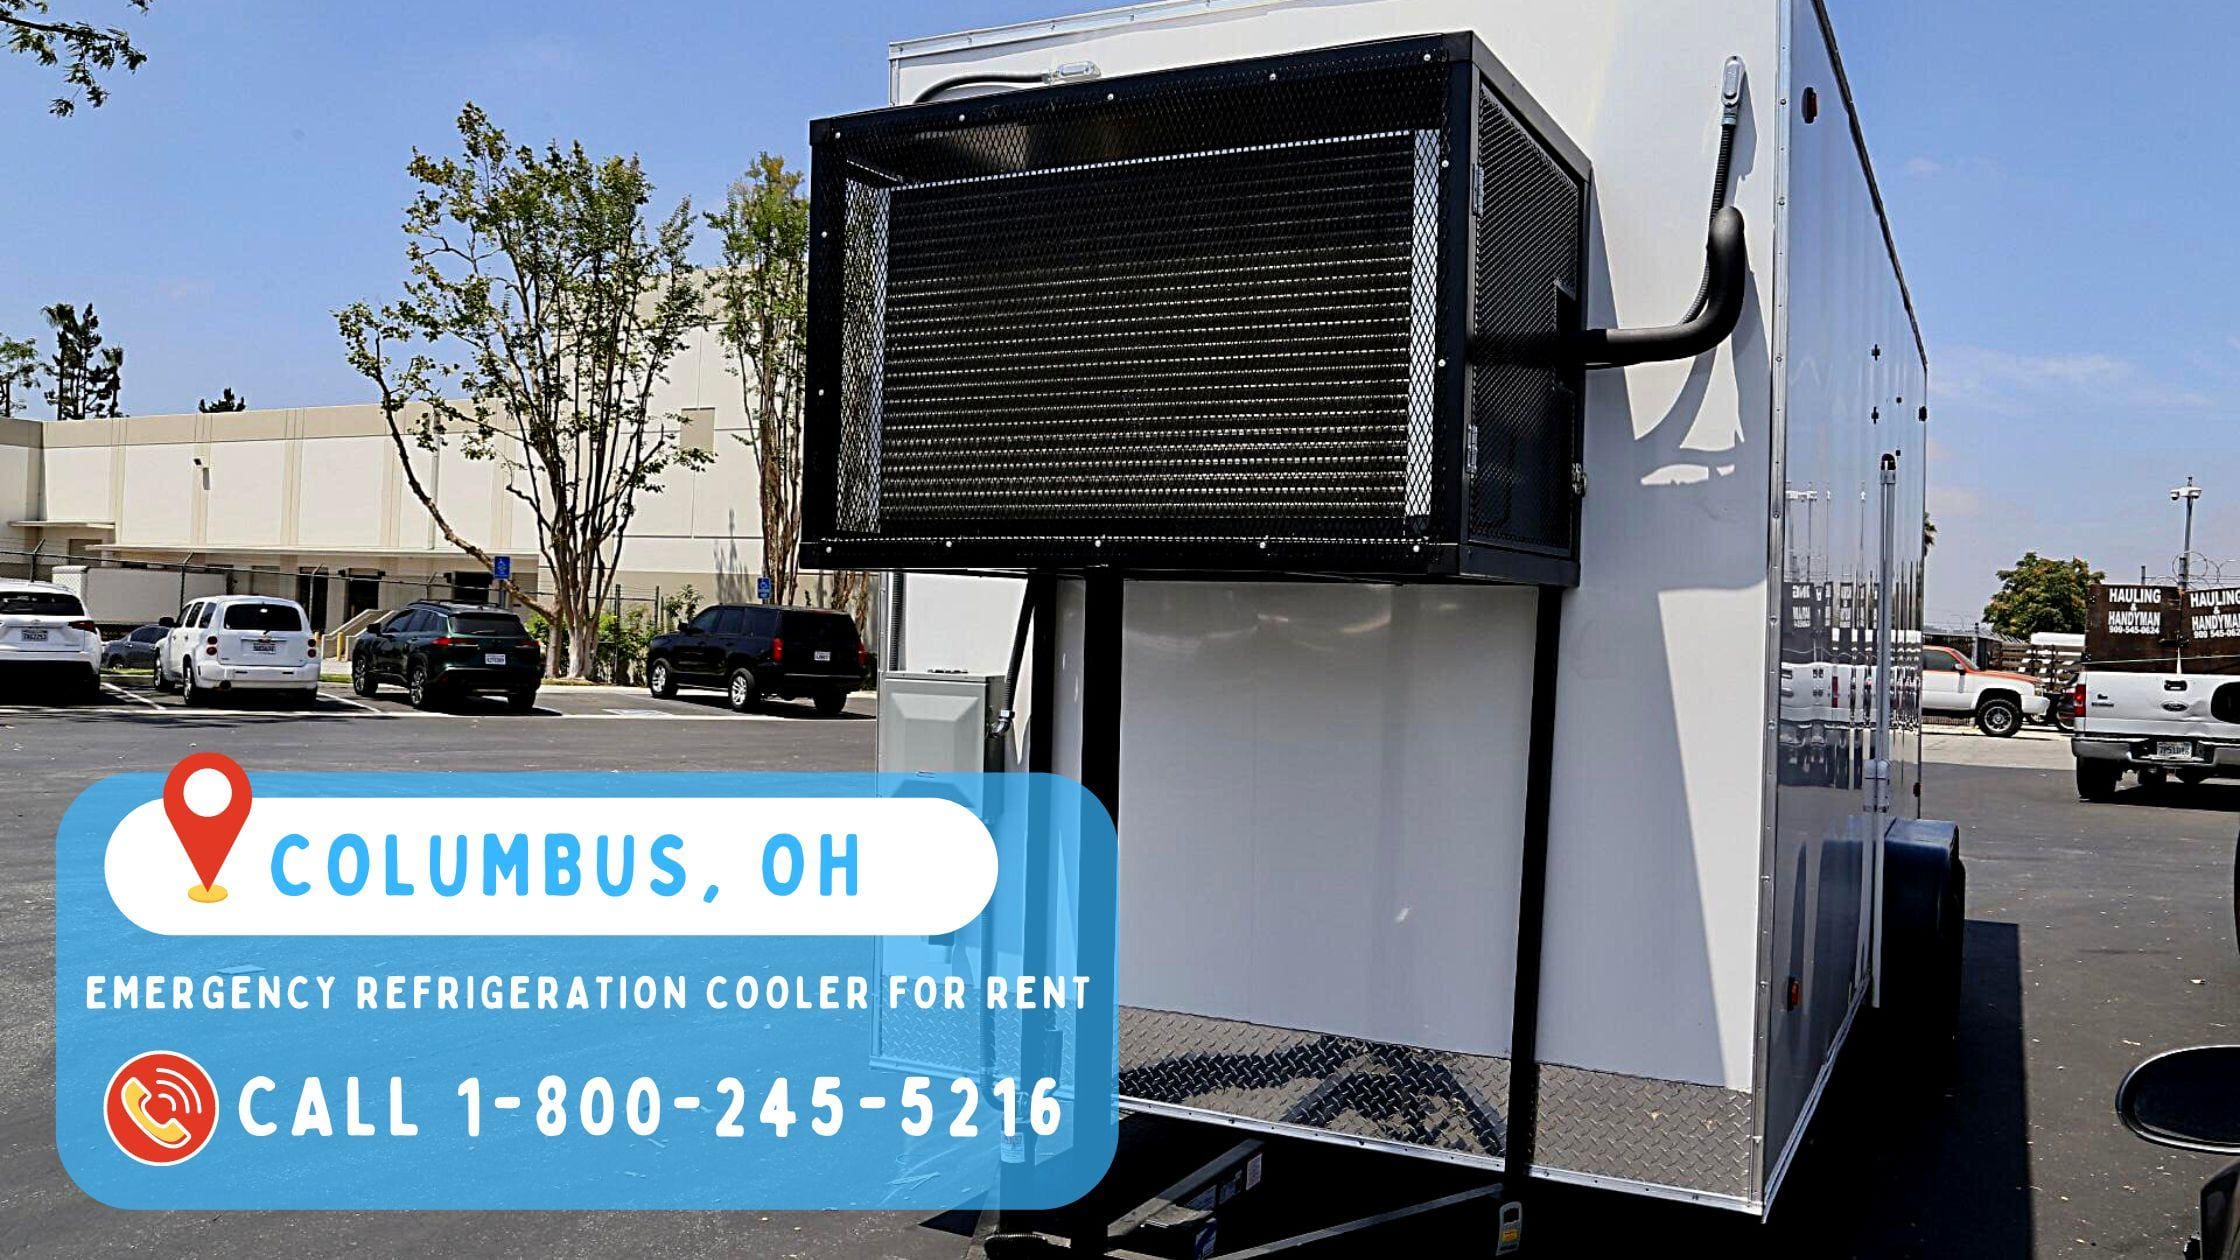 Emergency Refrigeration Cooler for rent in Columbus, OH